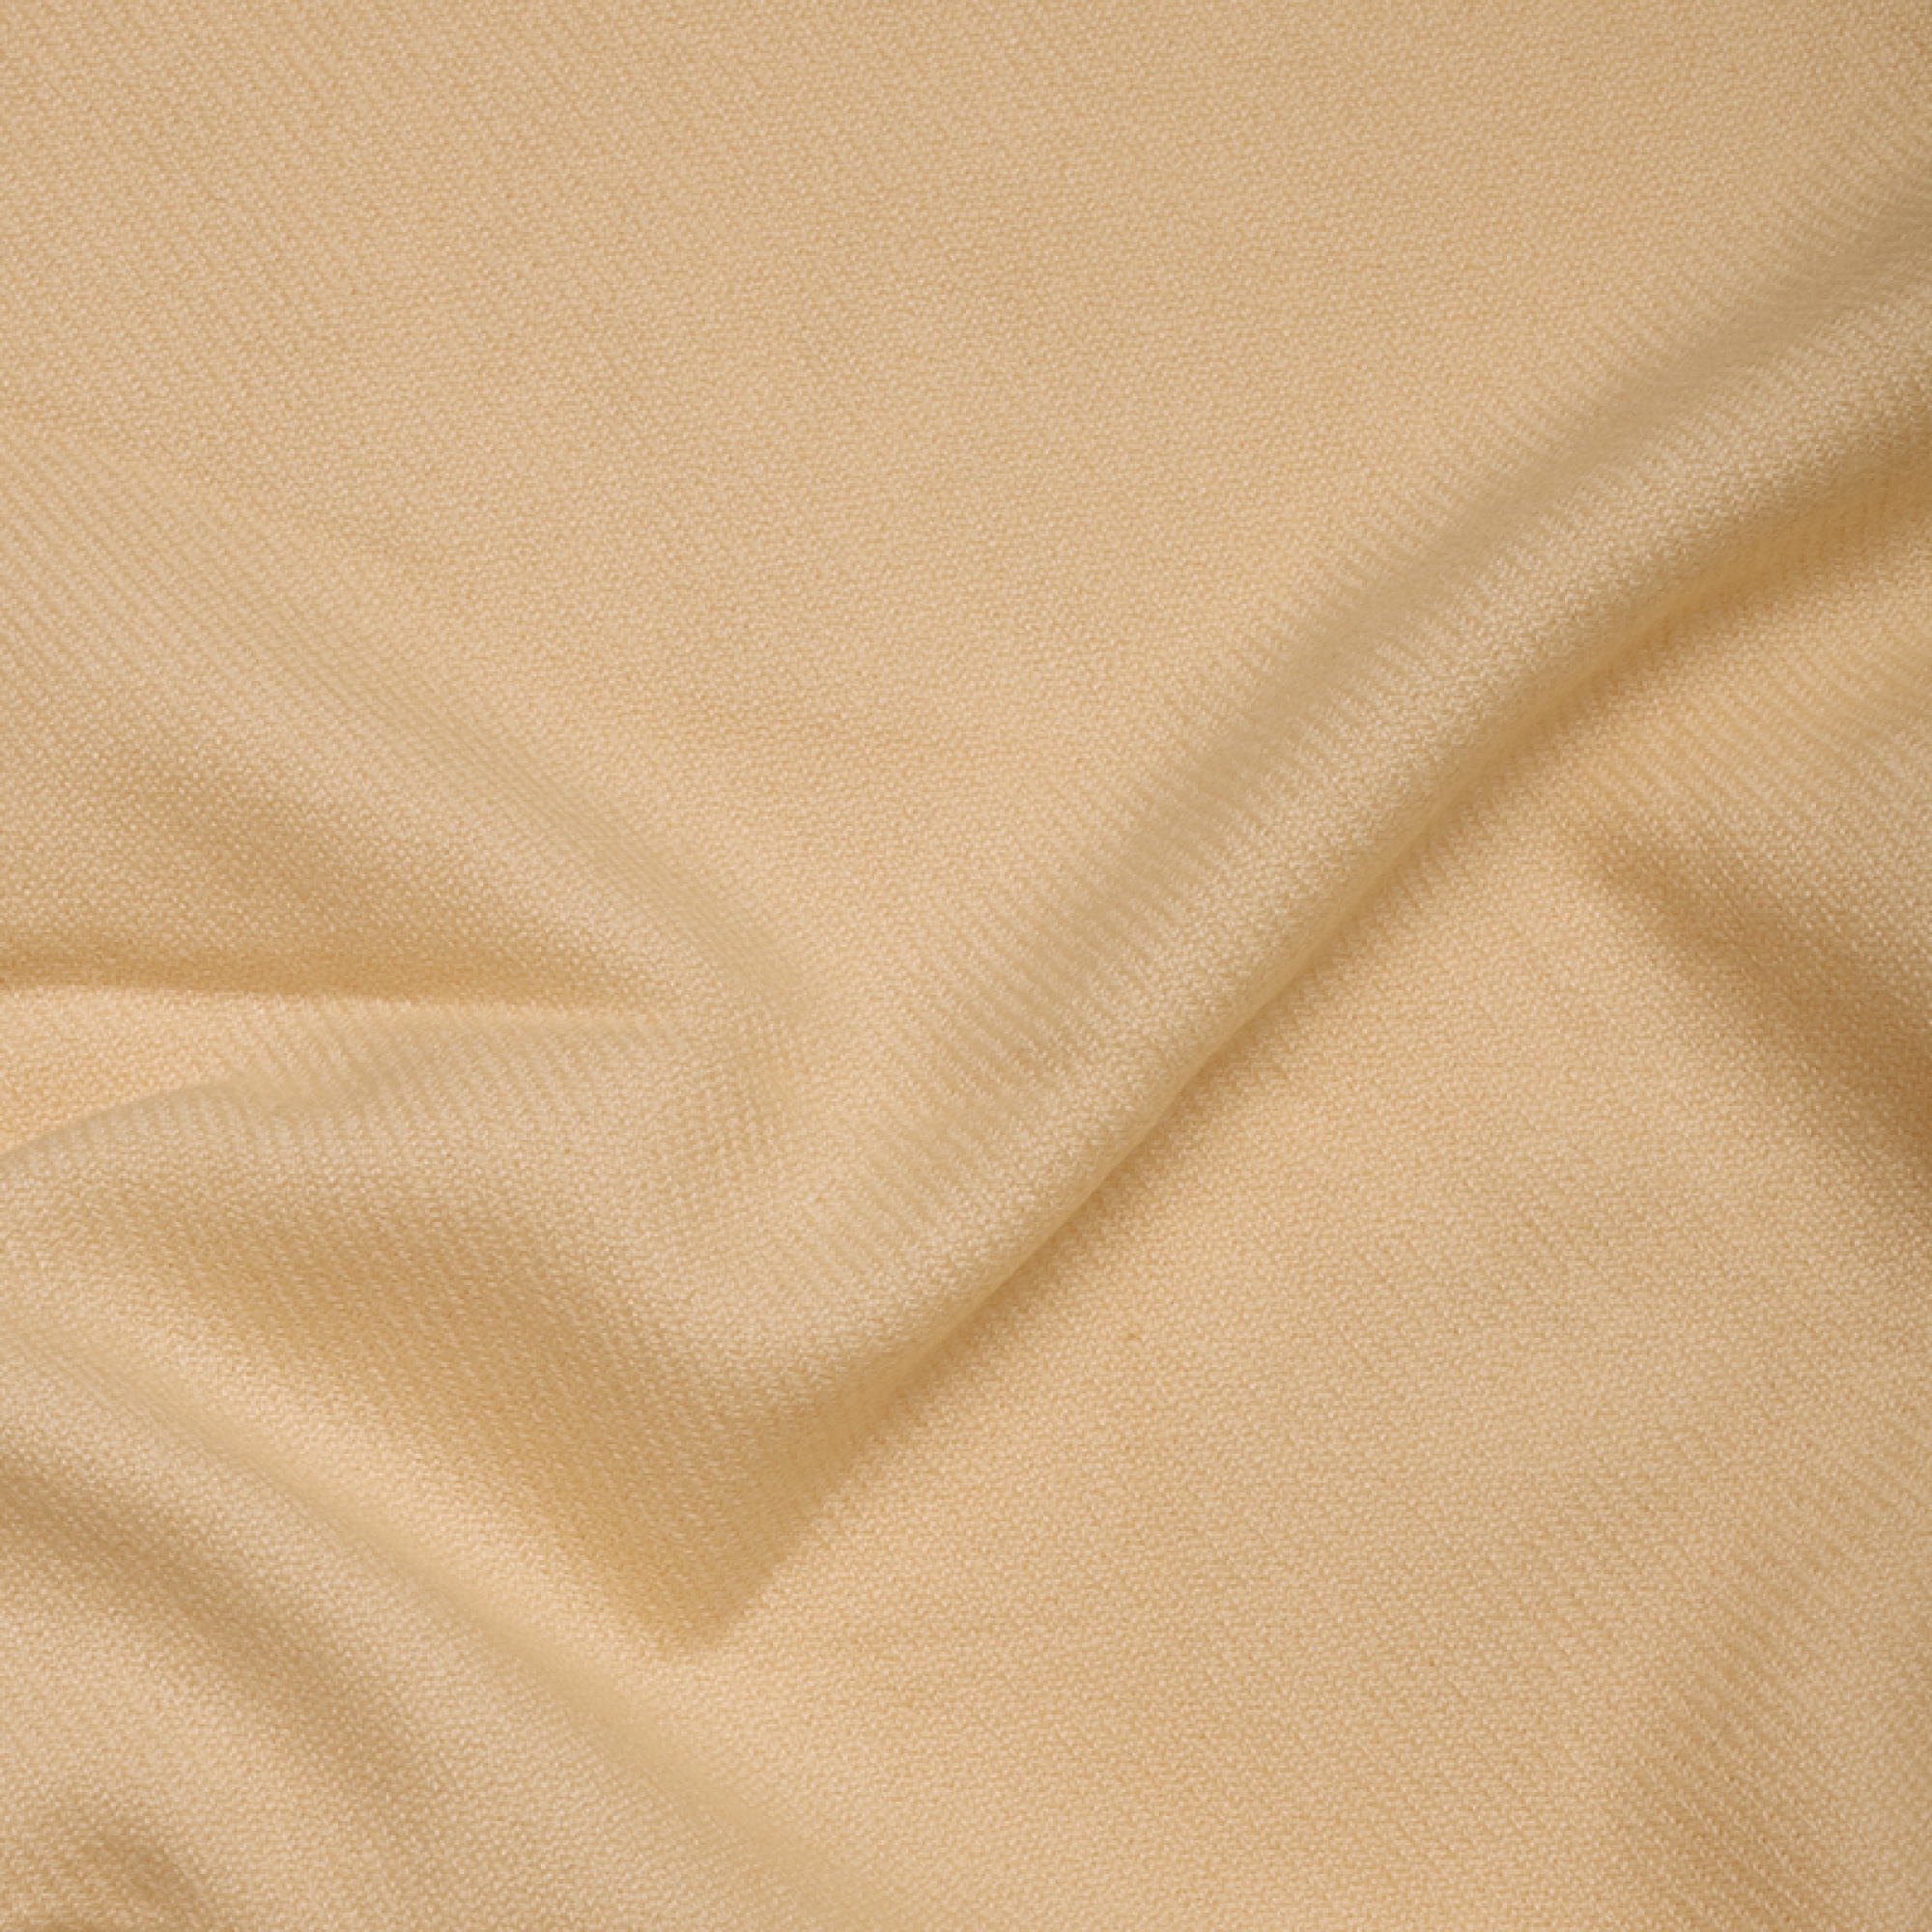 Cashmere accessories cocooning toodoo plain xl 240 x 260 champagne 240 x 260 cm